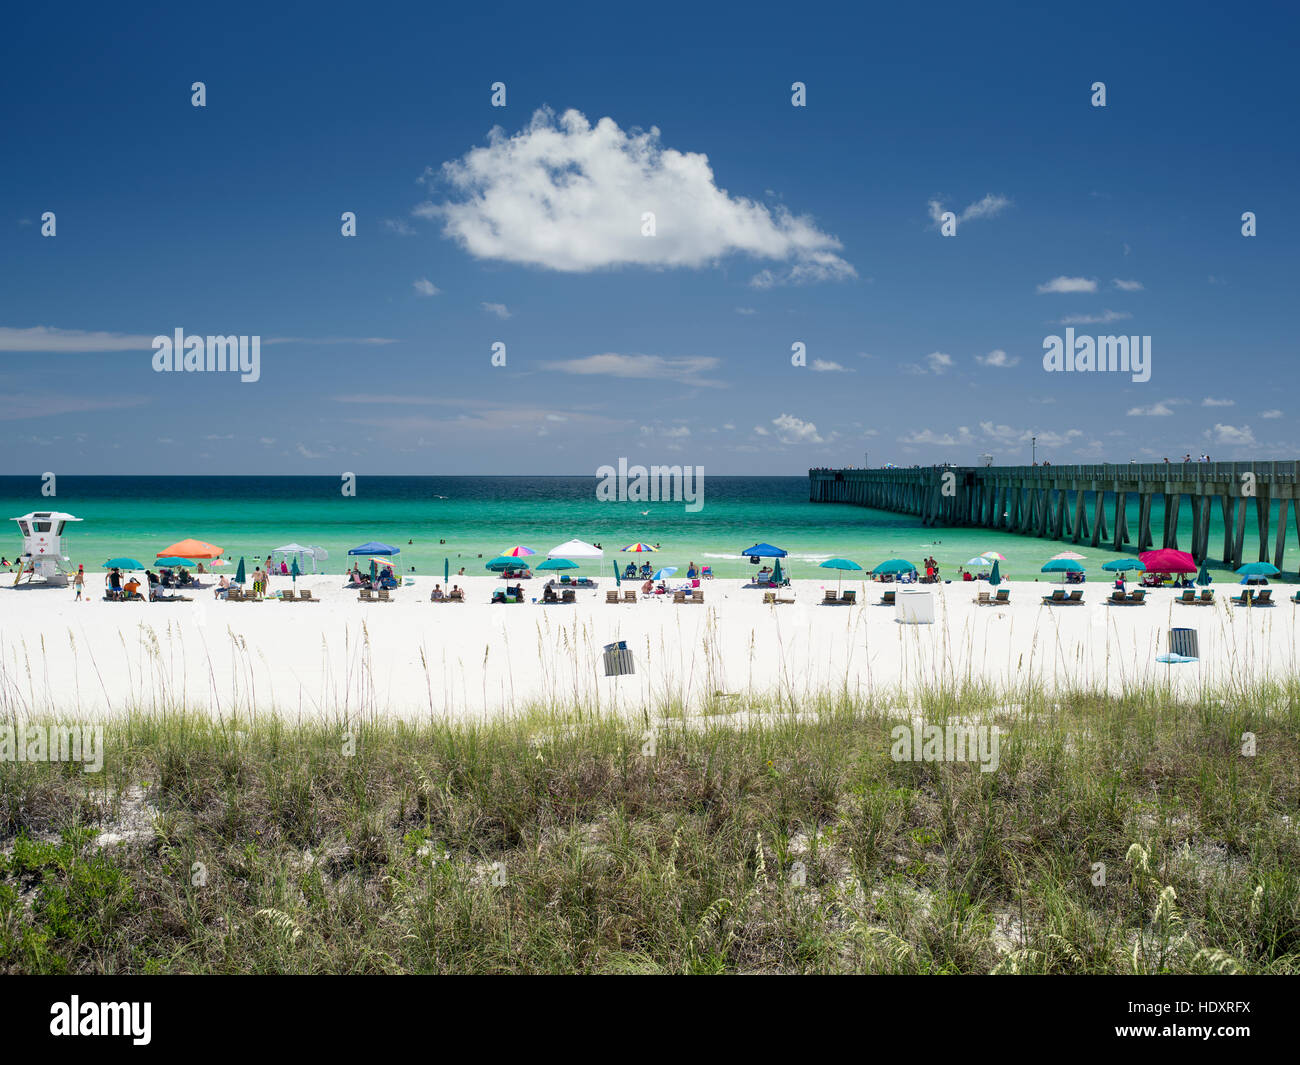 People enjoy the white sandy beach and turquoise waters at a Gulf Coast beach in Florida. Stock Photo